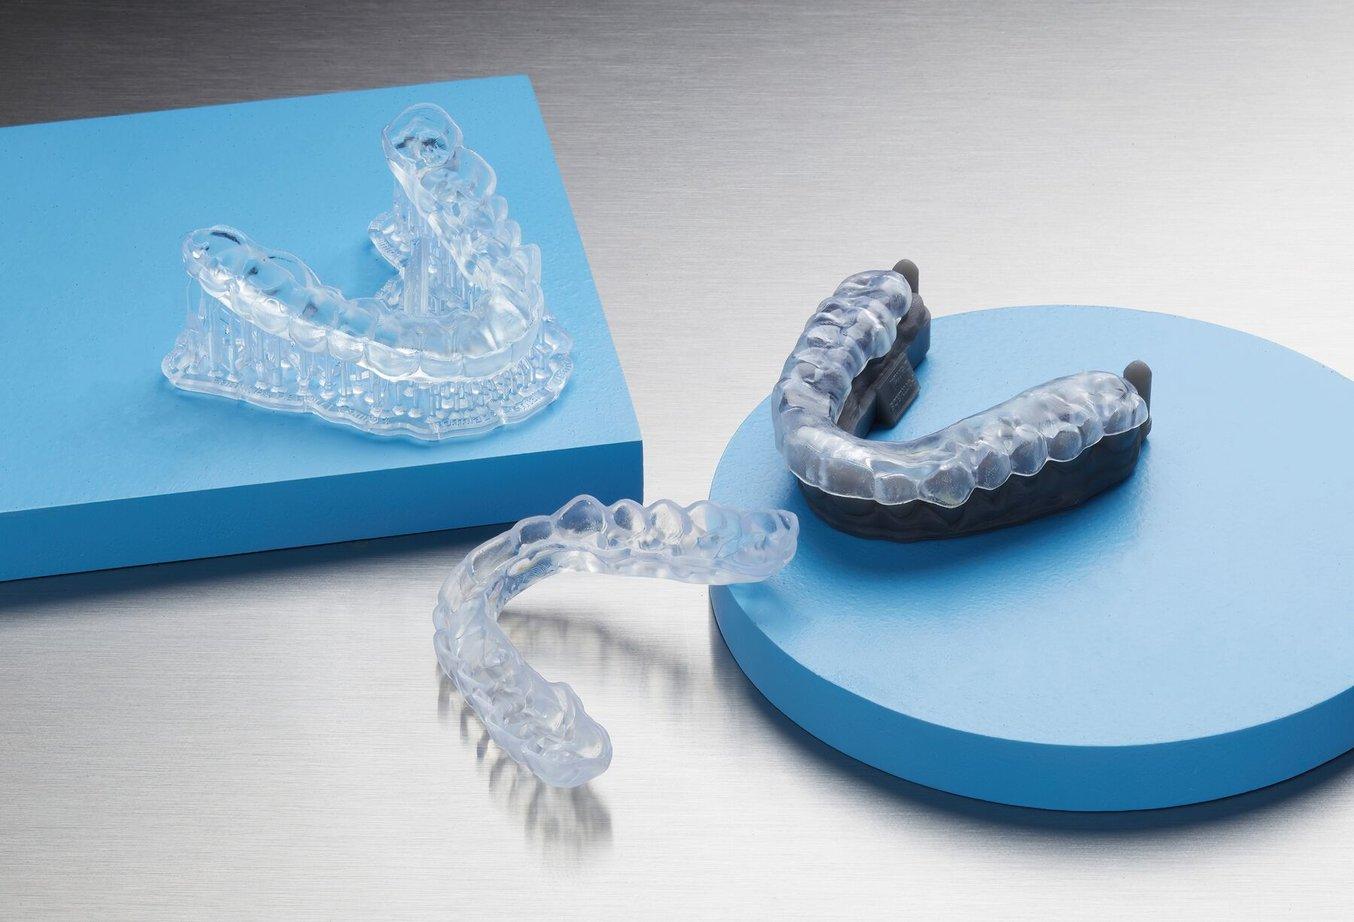 Three clear occlusal splints. One on a model and one still with 3D printed supports attached.